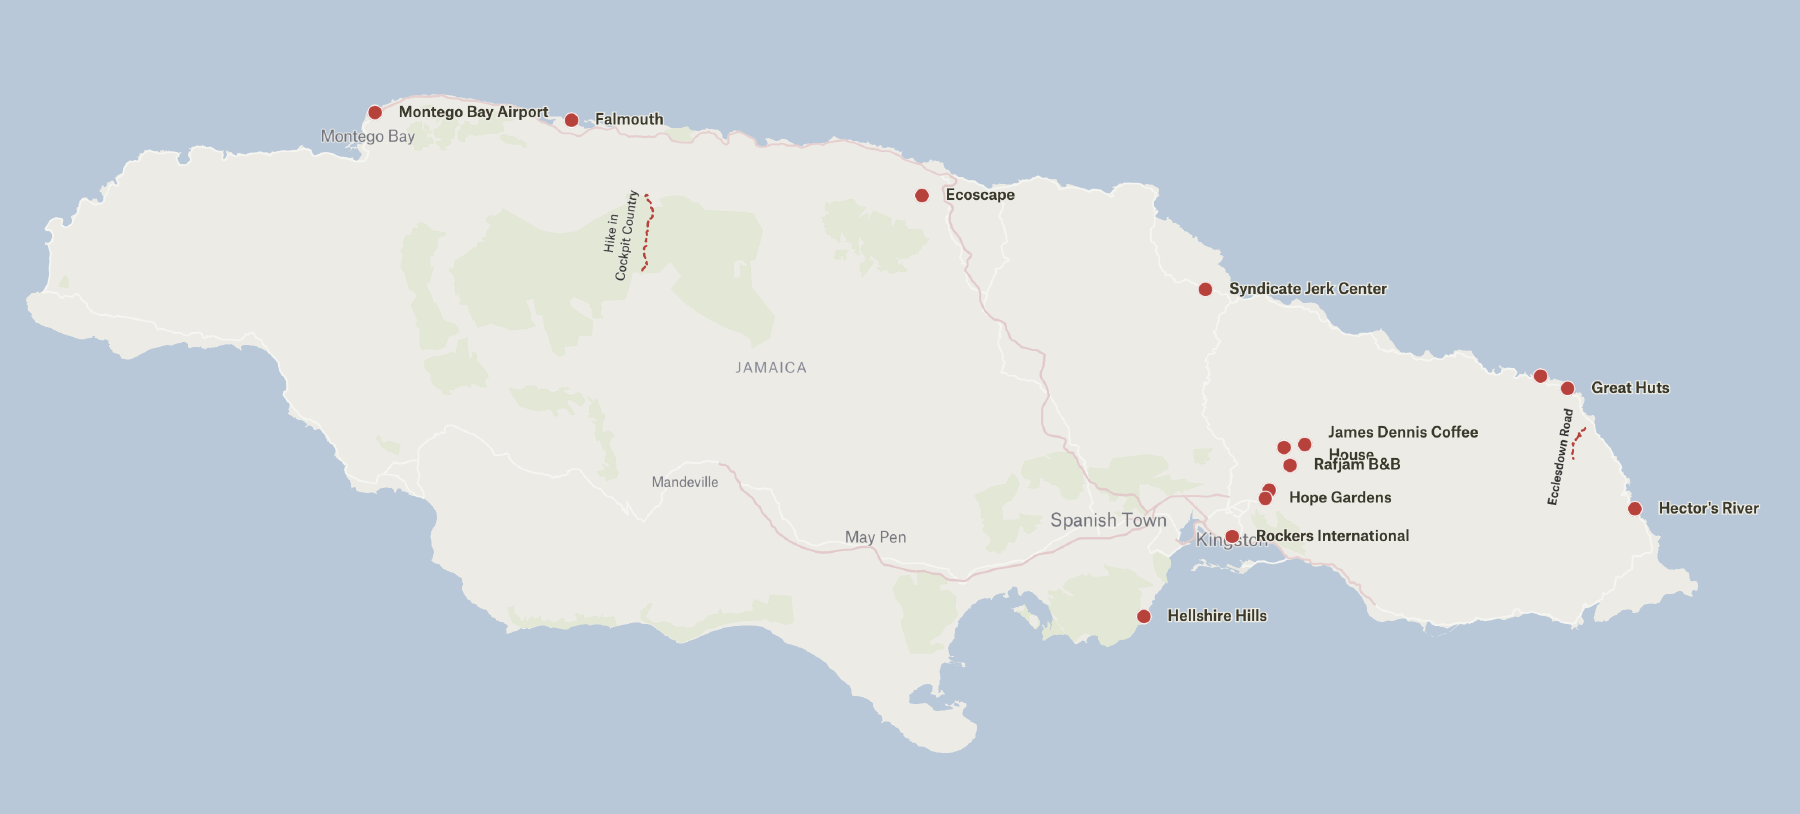 a map of Jamaica highlighting some places from this trip